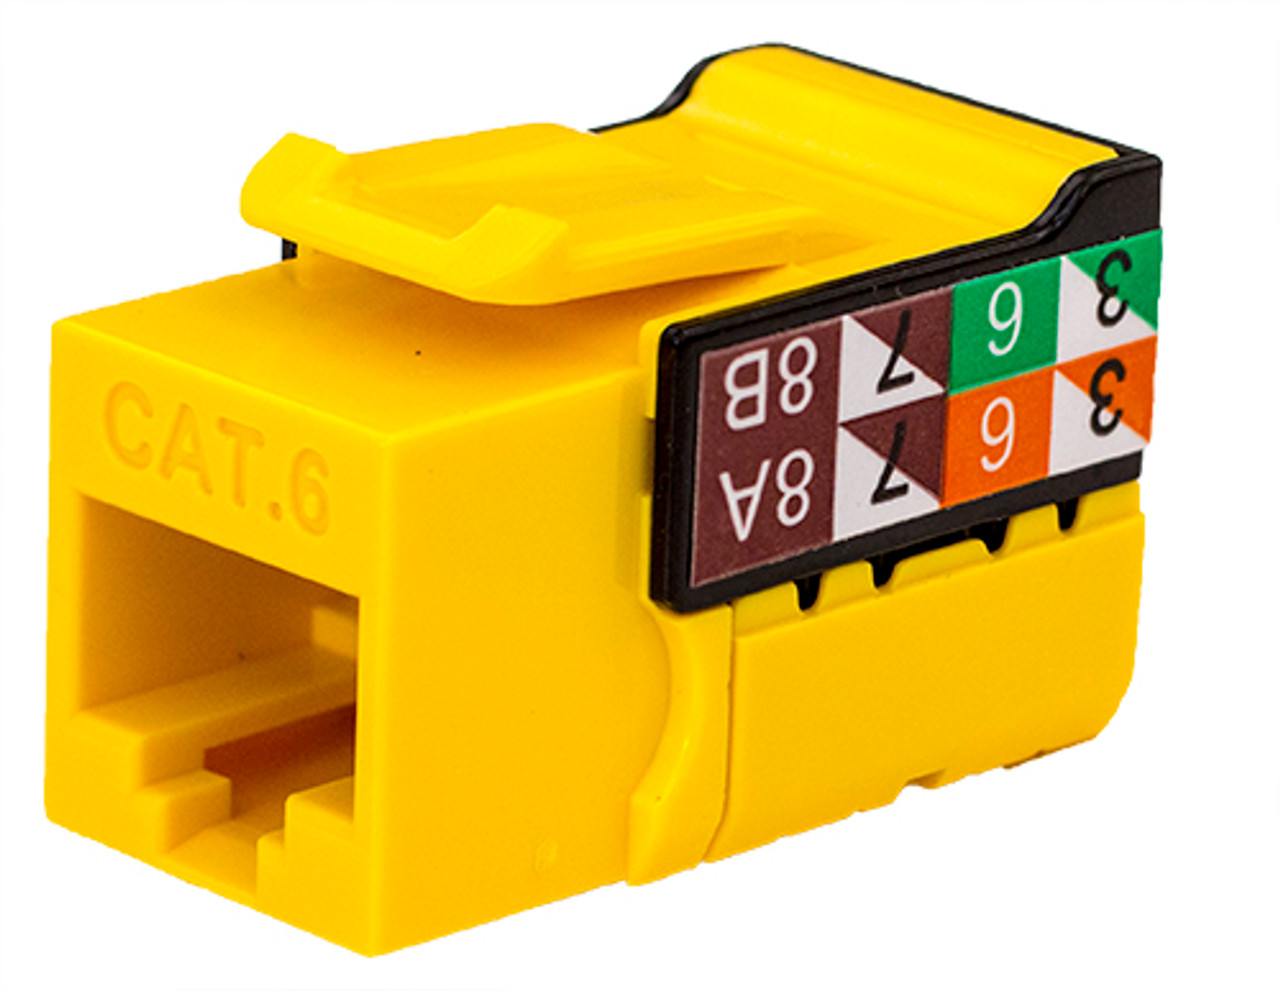 CAT6 Data Grade Keystone Jack – 25 Pack, RJ45, 8×8, Terminate These Jacks with our I-Punch Tool